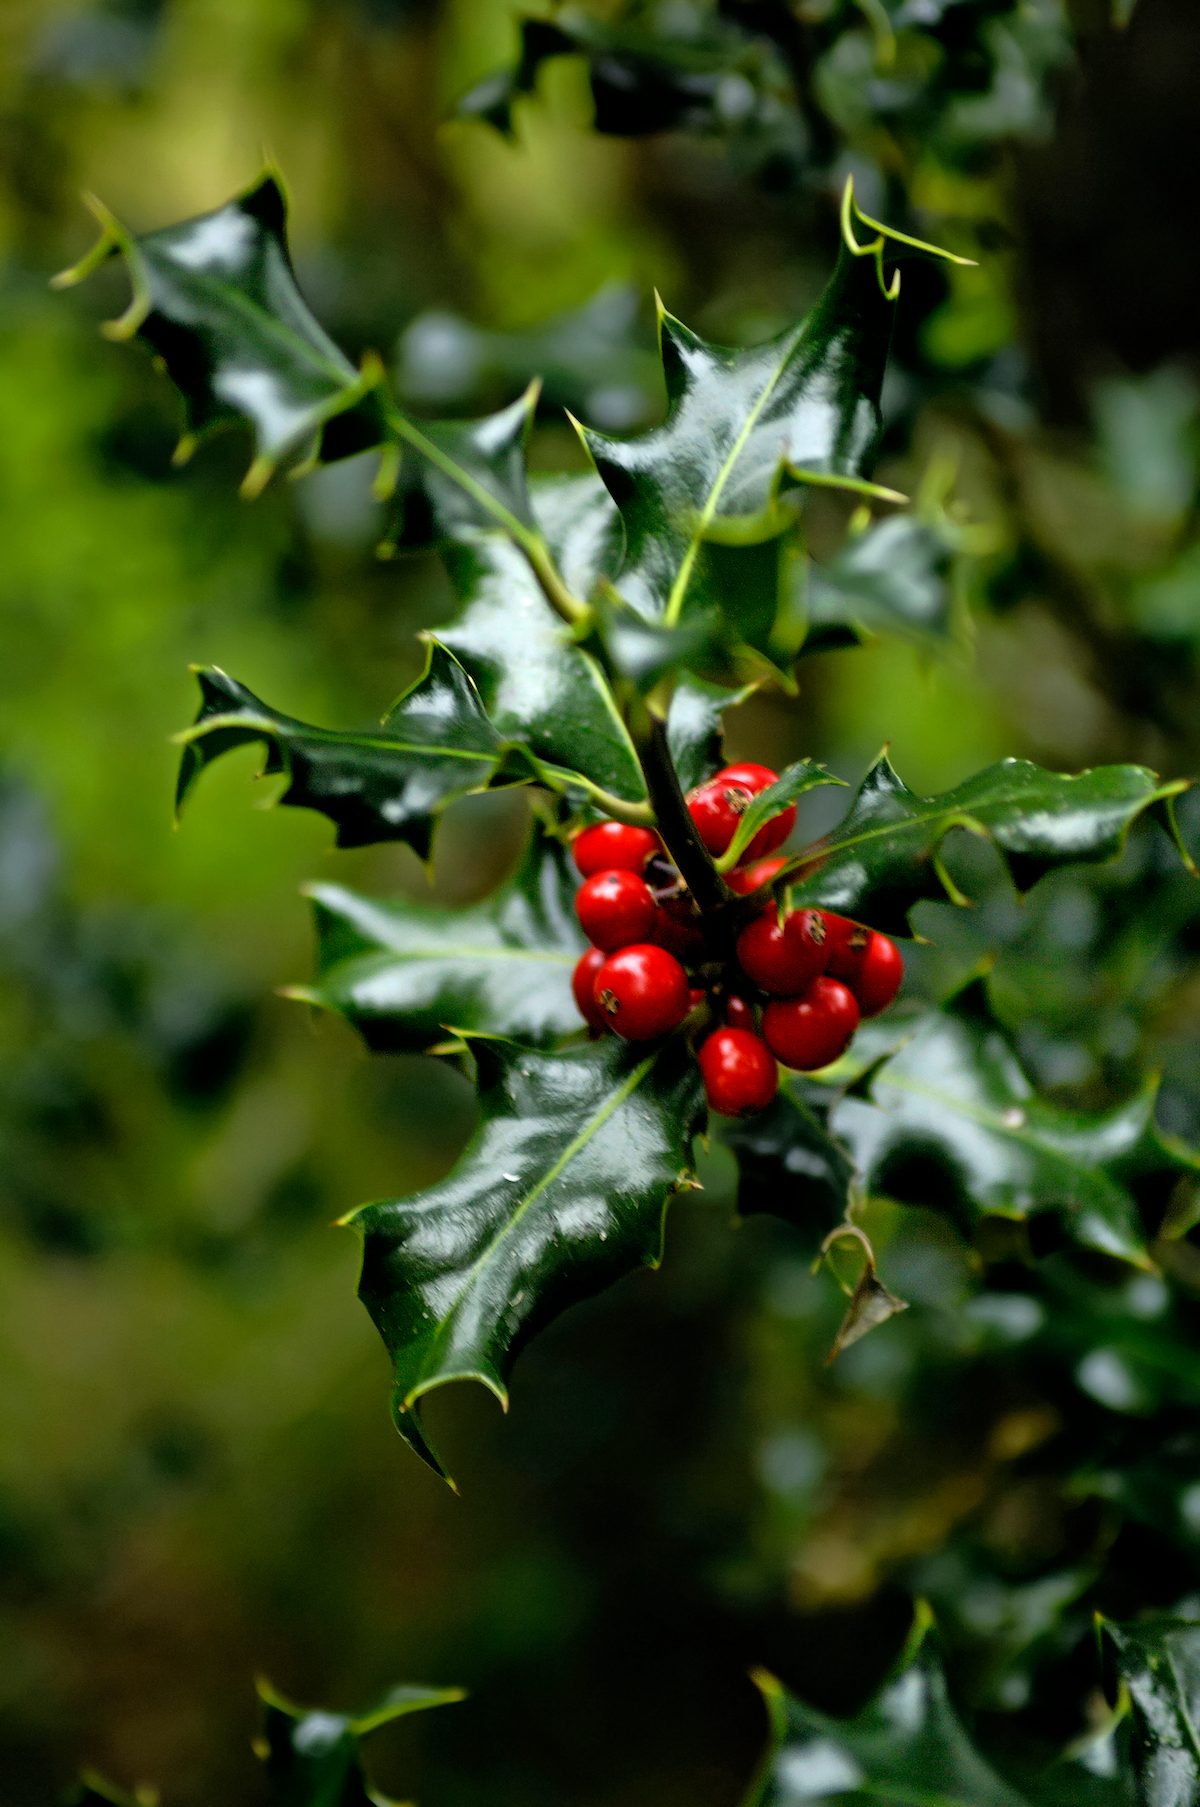 Christmas holly facts and traditions